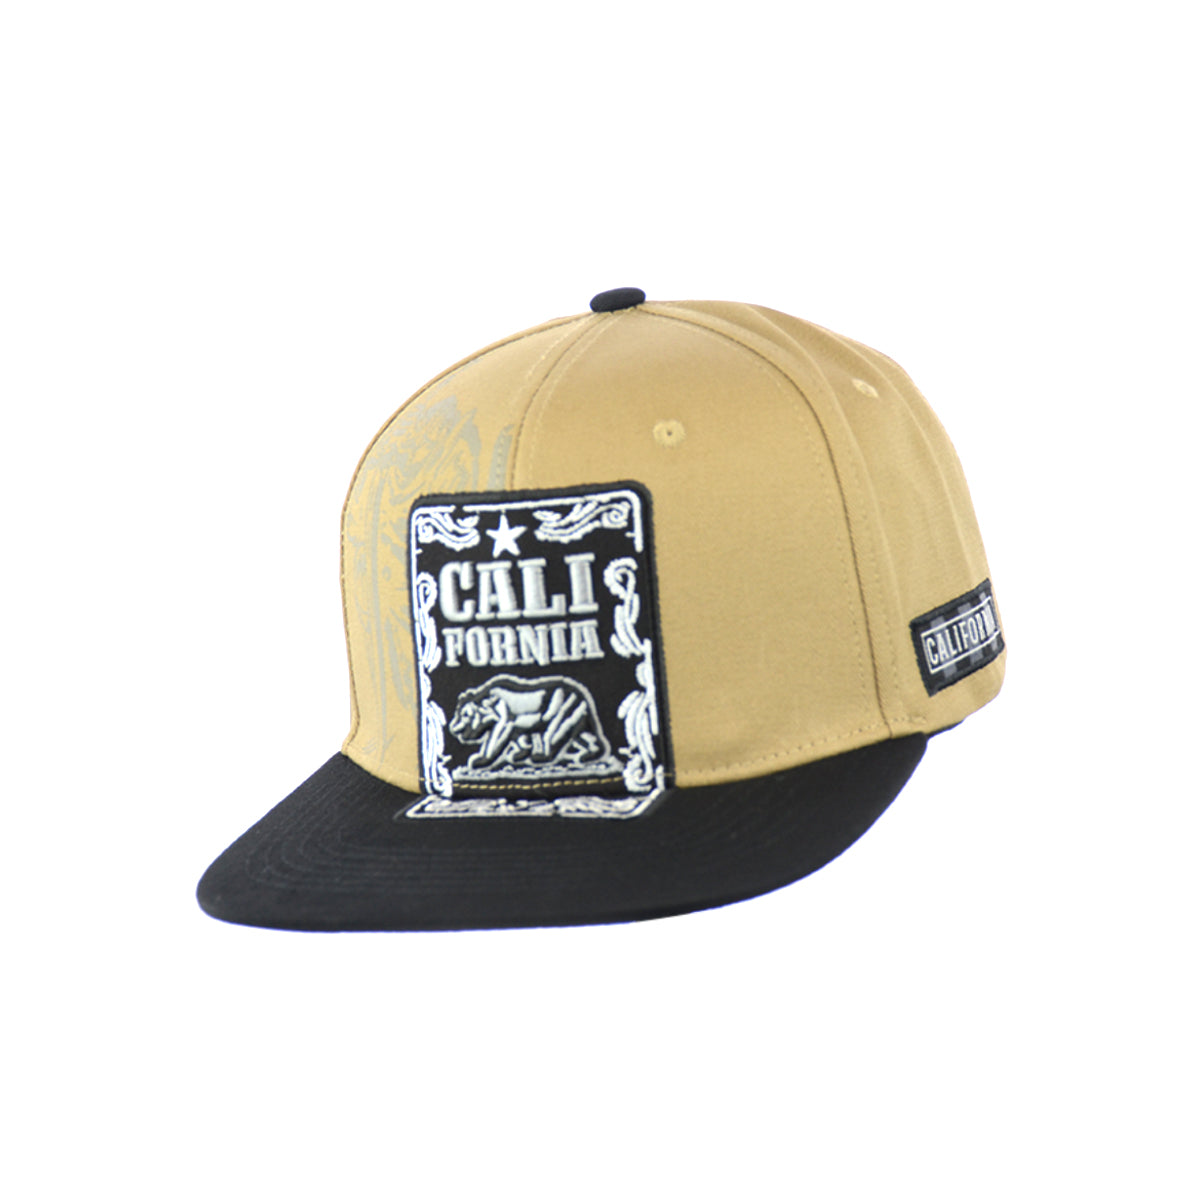 California Hat Embroidered Snapback